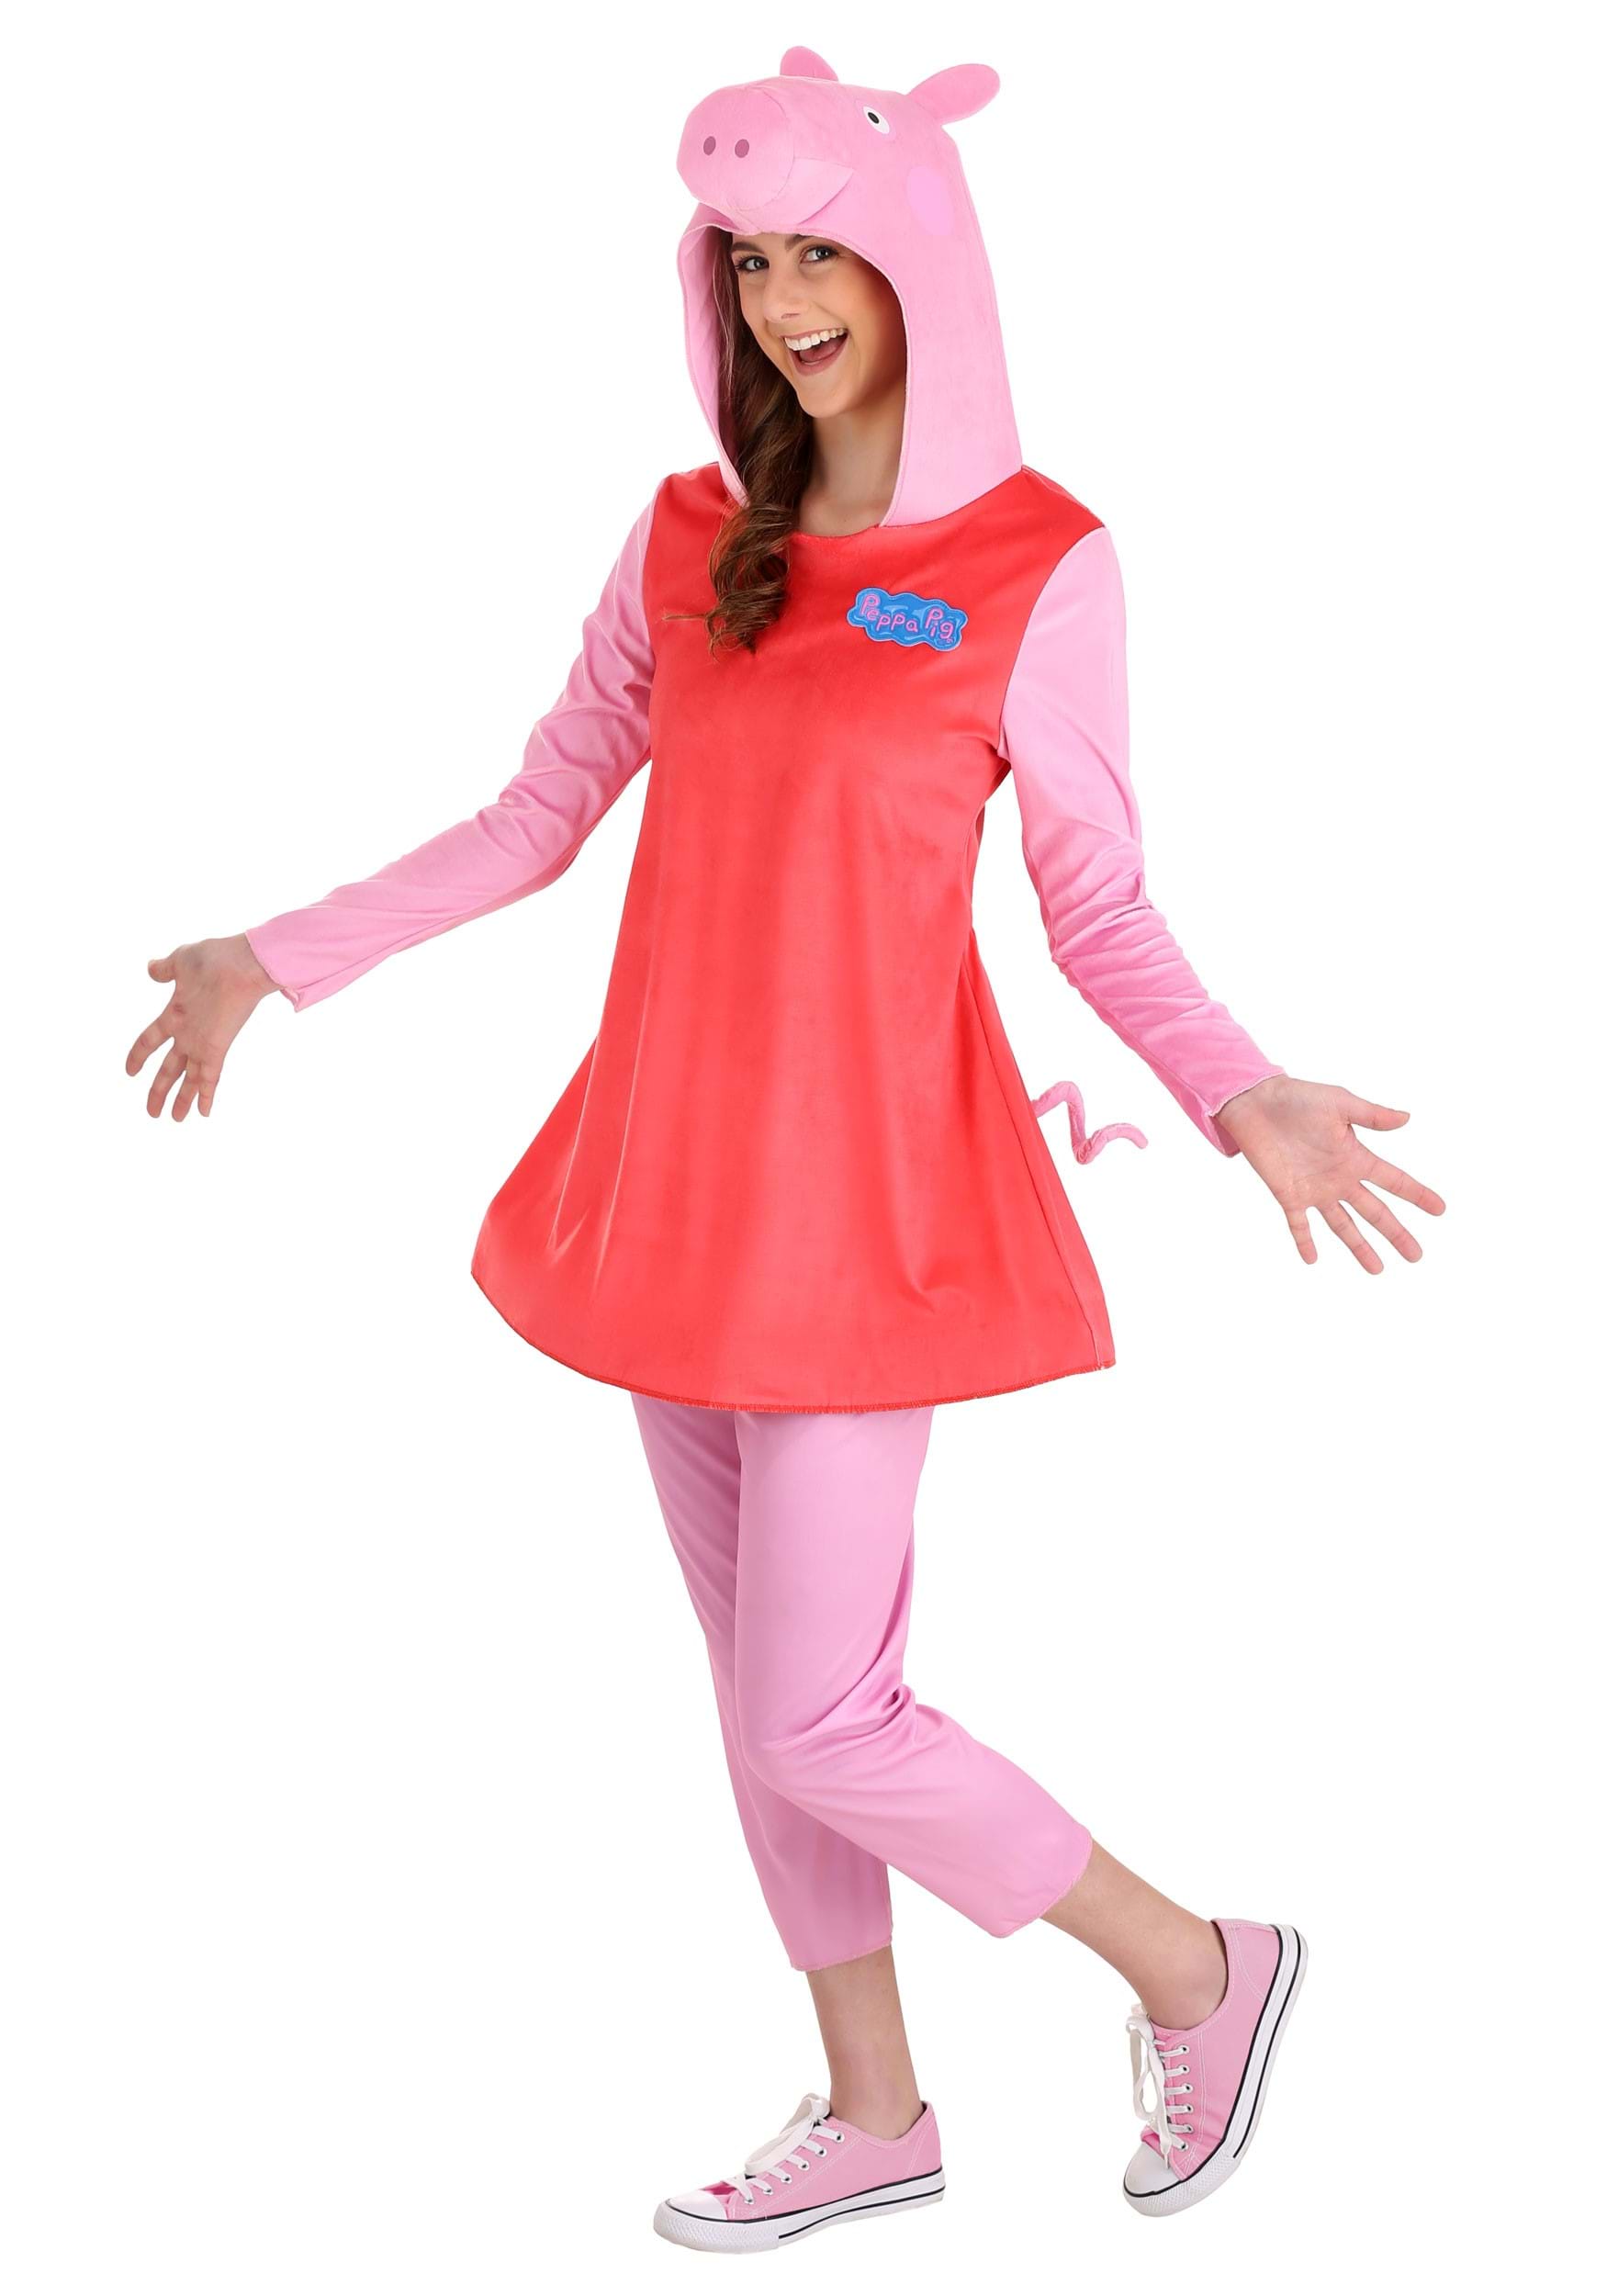 Photos - Fancy Dress Peppa Disguise Limited Women's  Pig Adult Deluxe Costume Pink/Red 